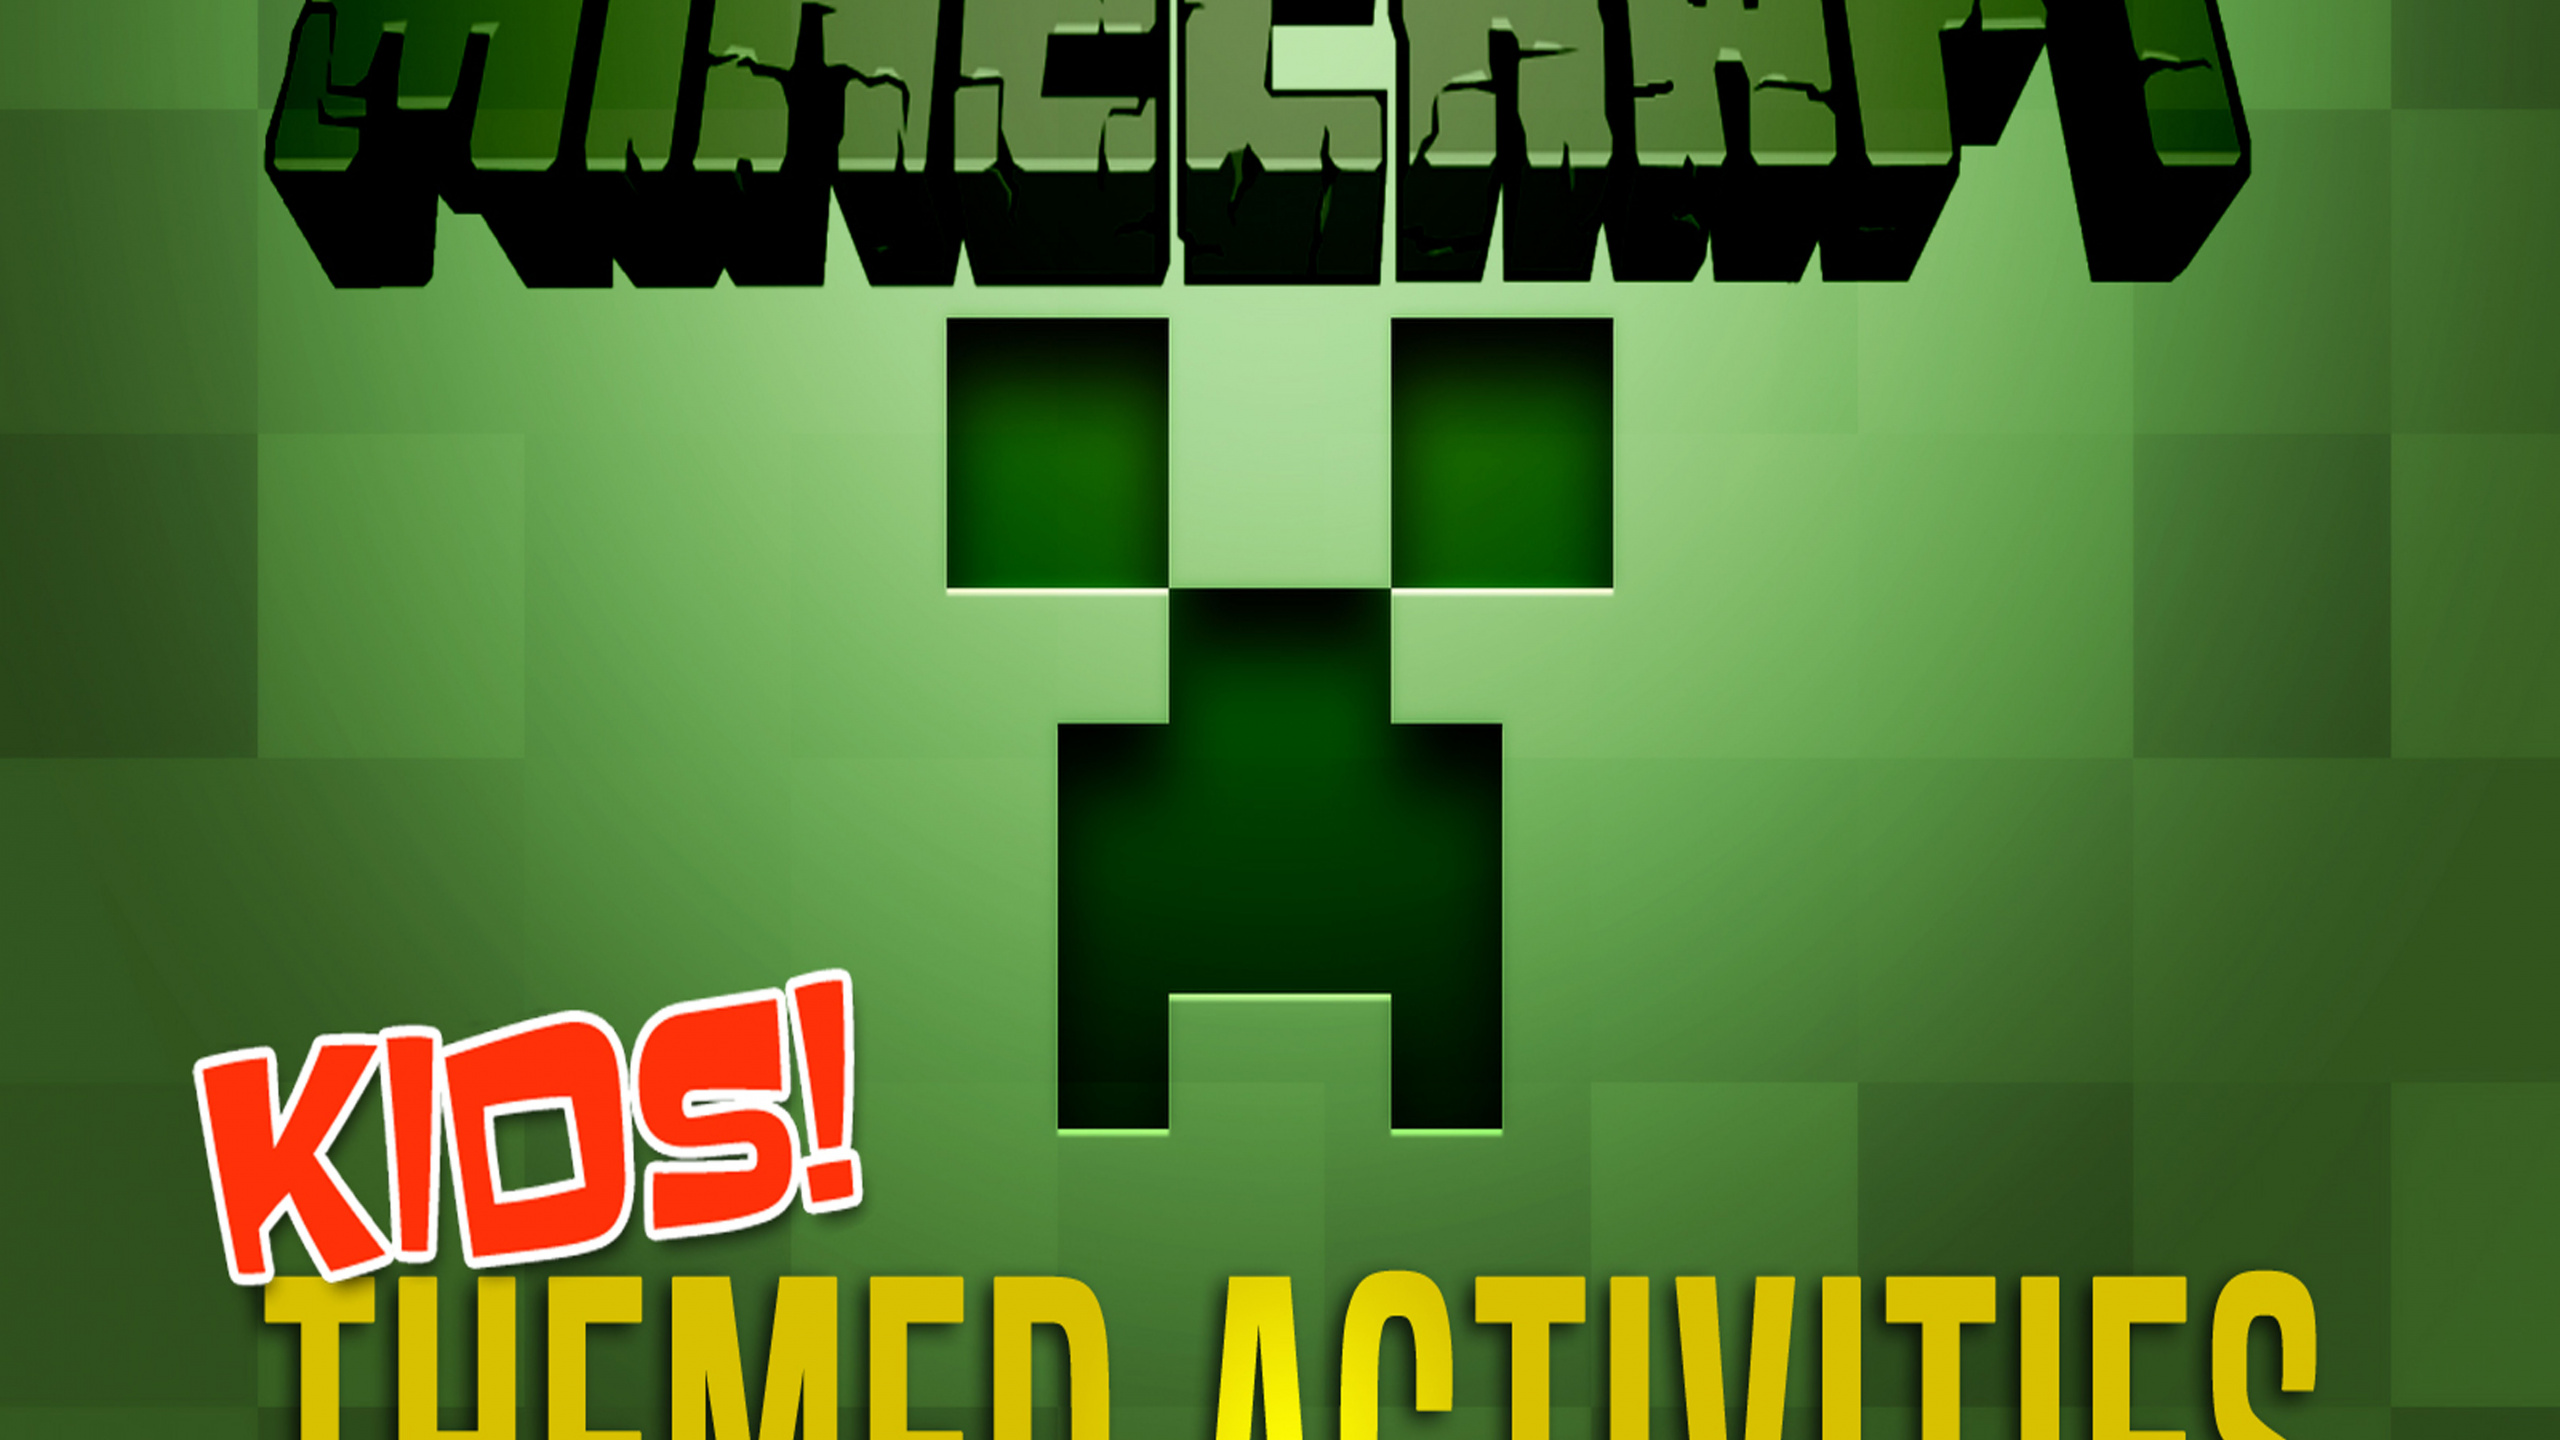 Minecraft, Green, Games, Creeper, Survival Game. Wallpaper in 2560x1440 Resolution